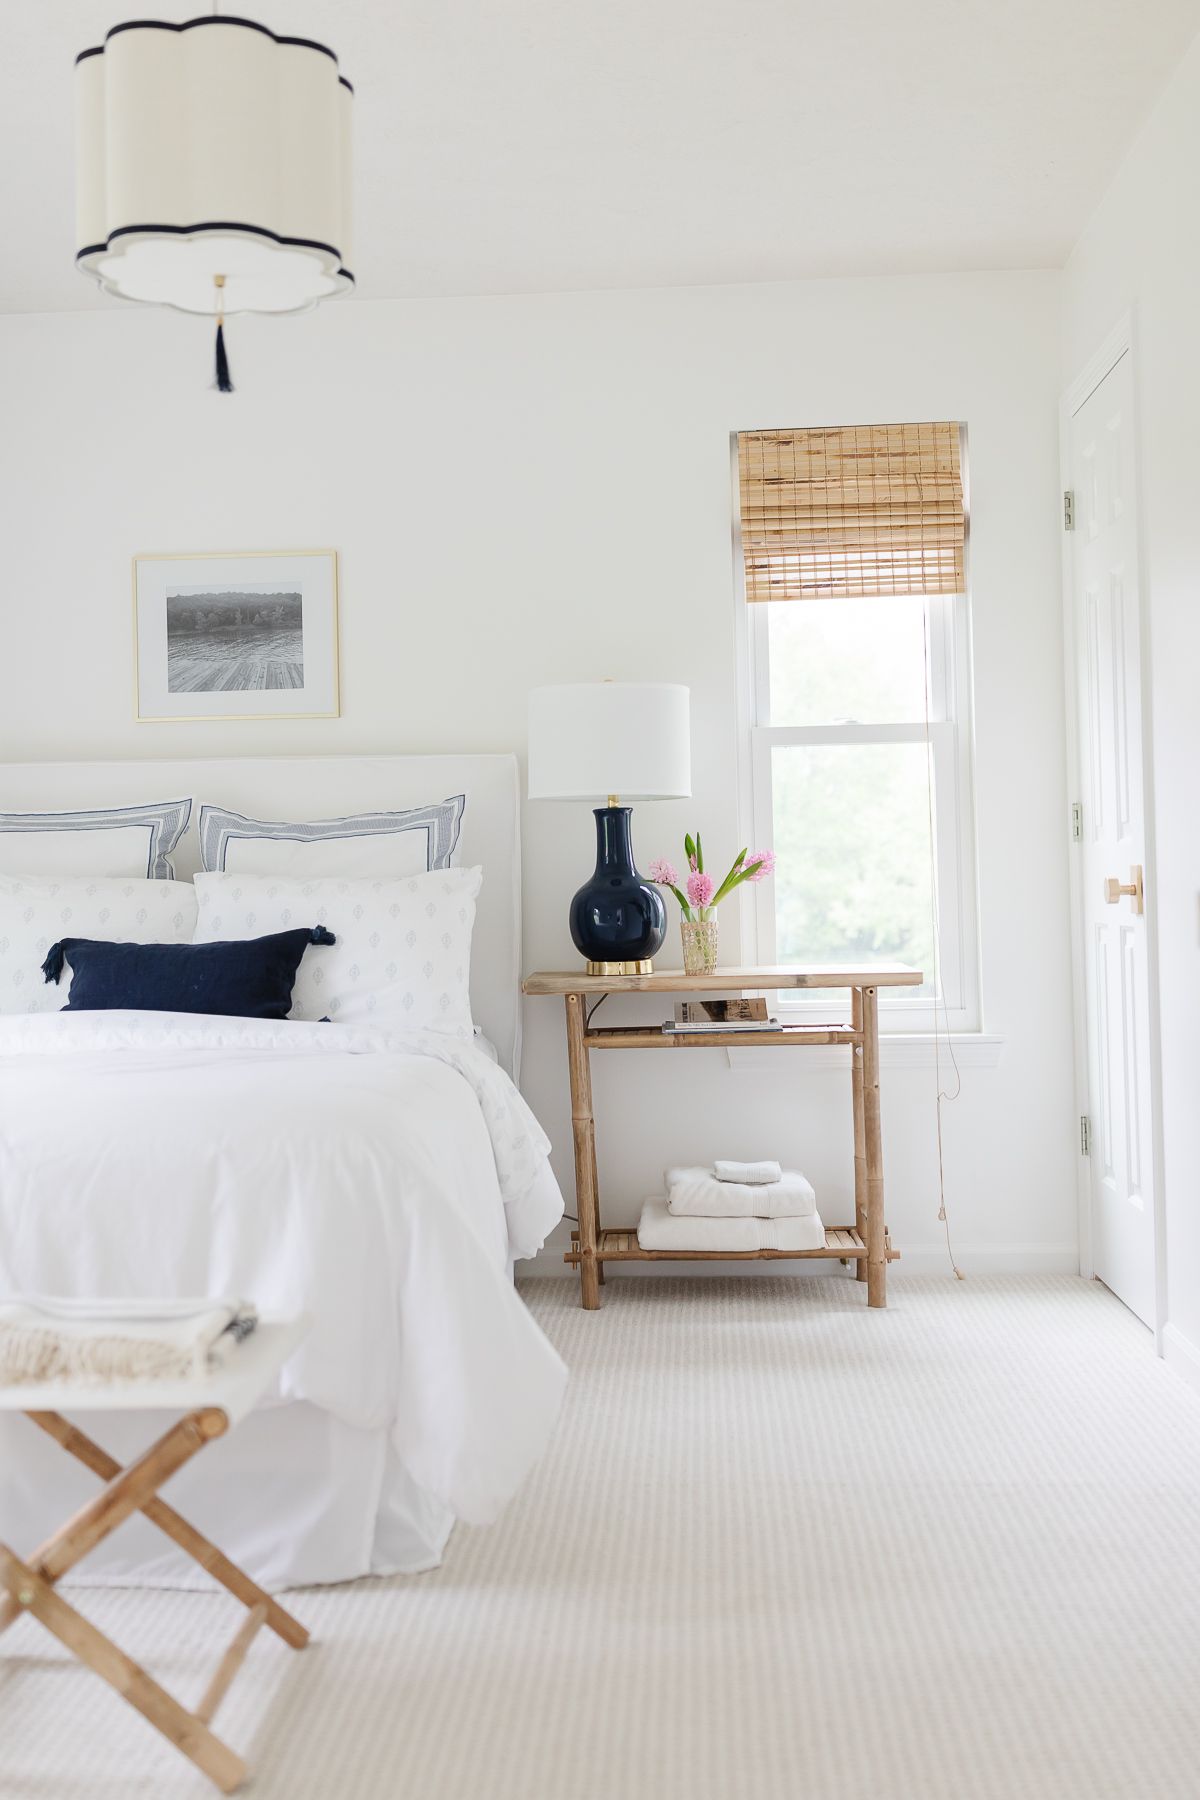 A white bedroom with navy accents and an upholstered bed